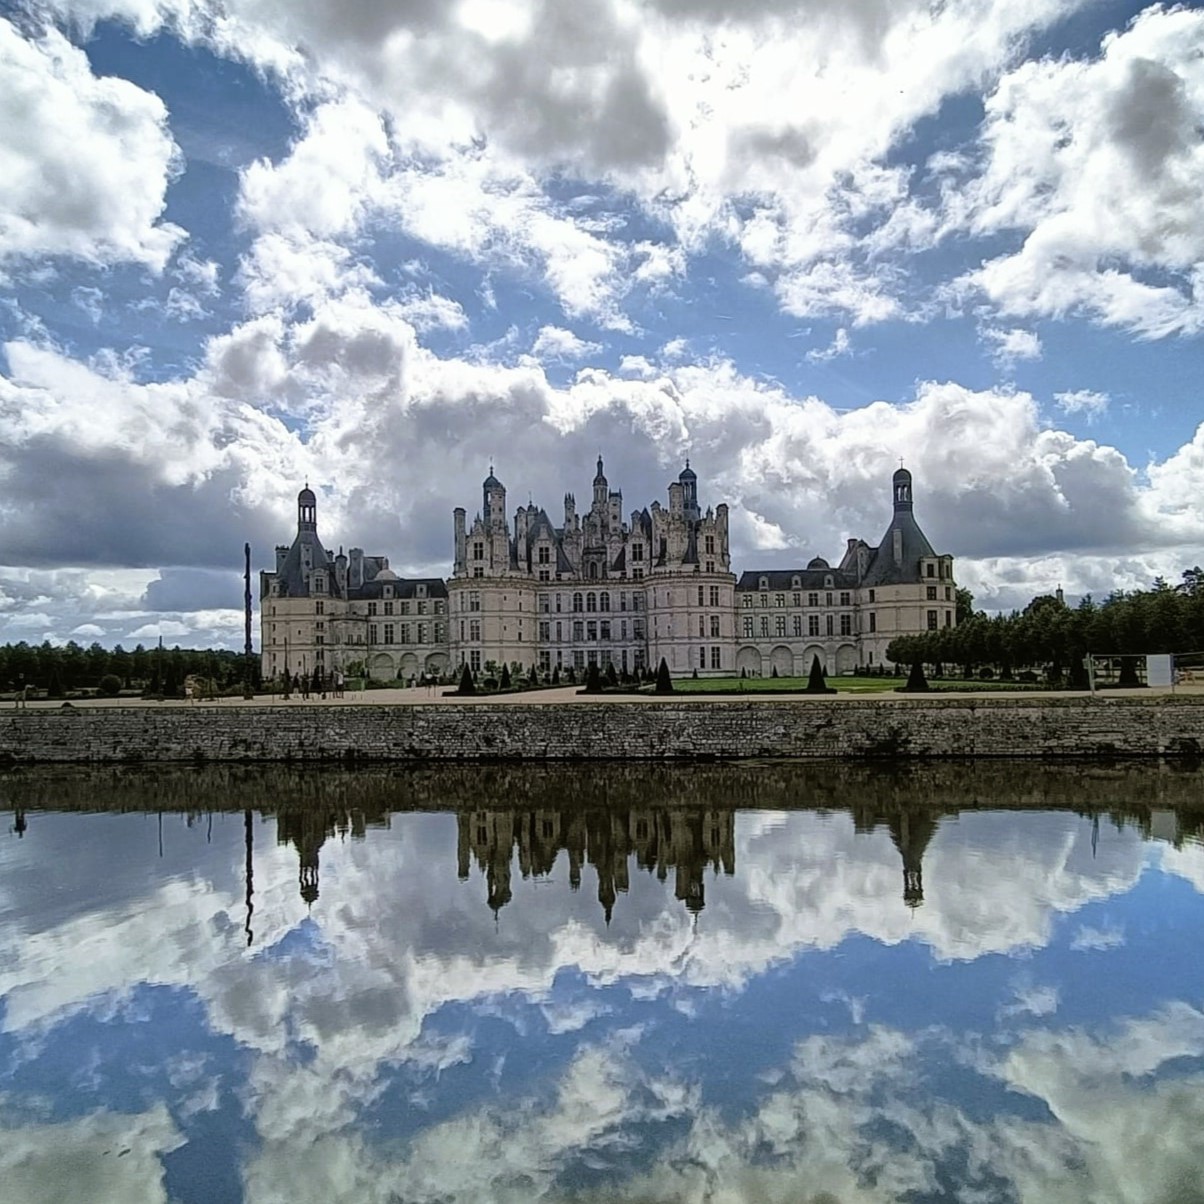 Chambord Castle and the magic of Christmas